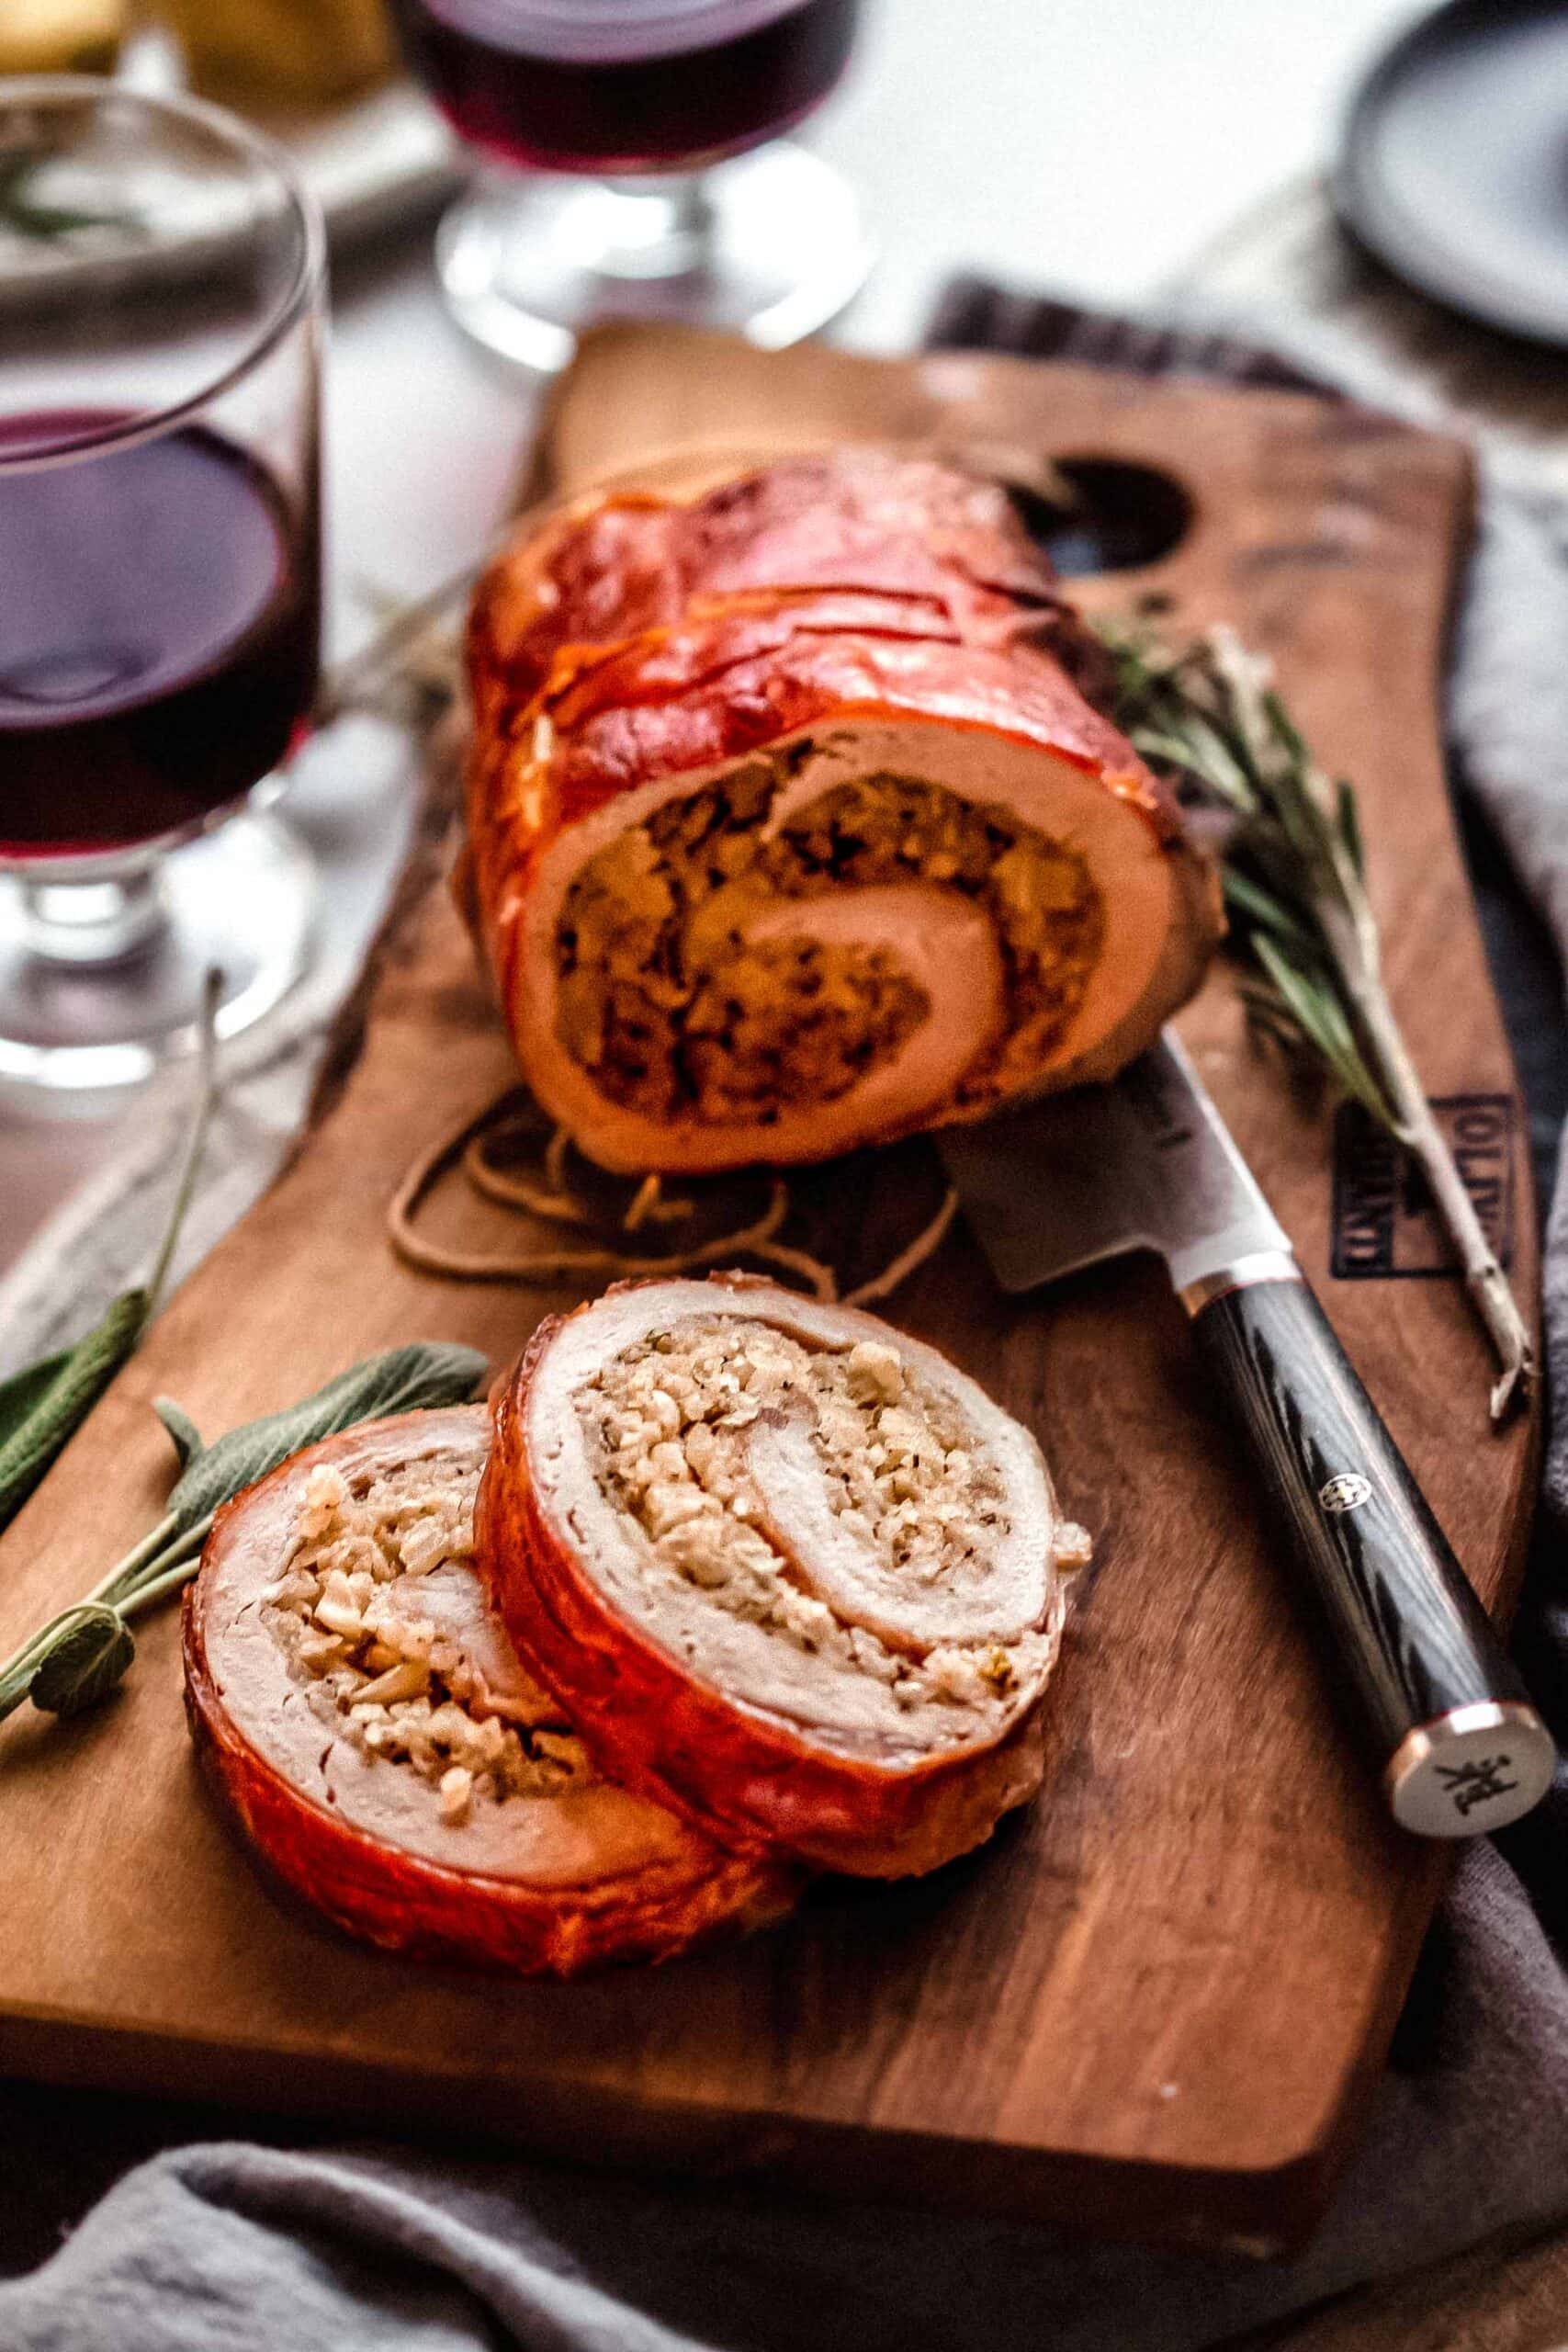 Prosciutto wrapped pork tenderloin sliced in pieces so that you can see the stuffing filling.